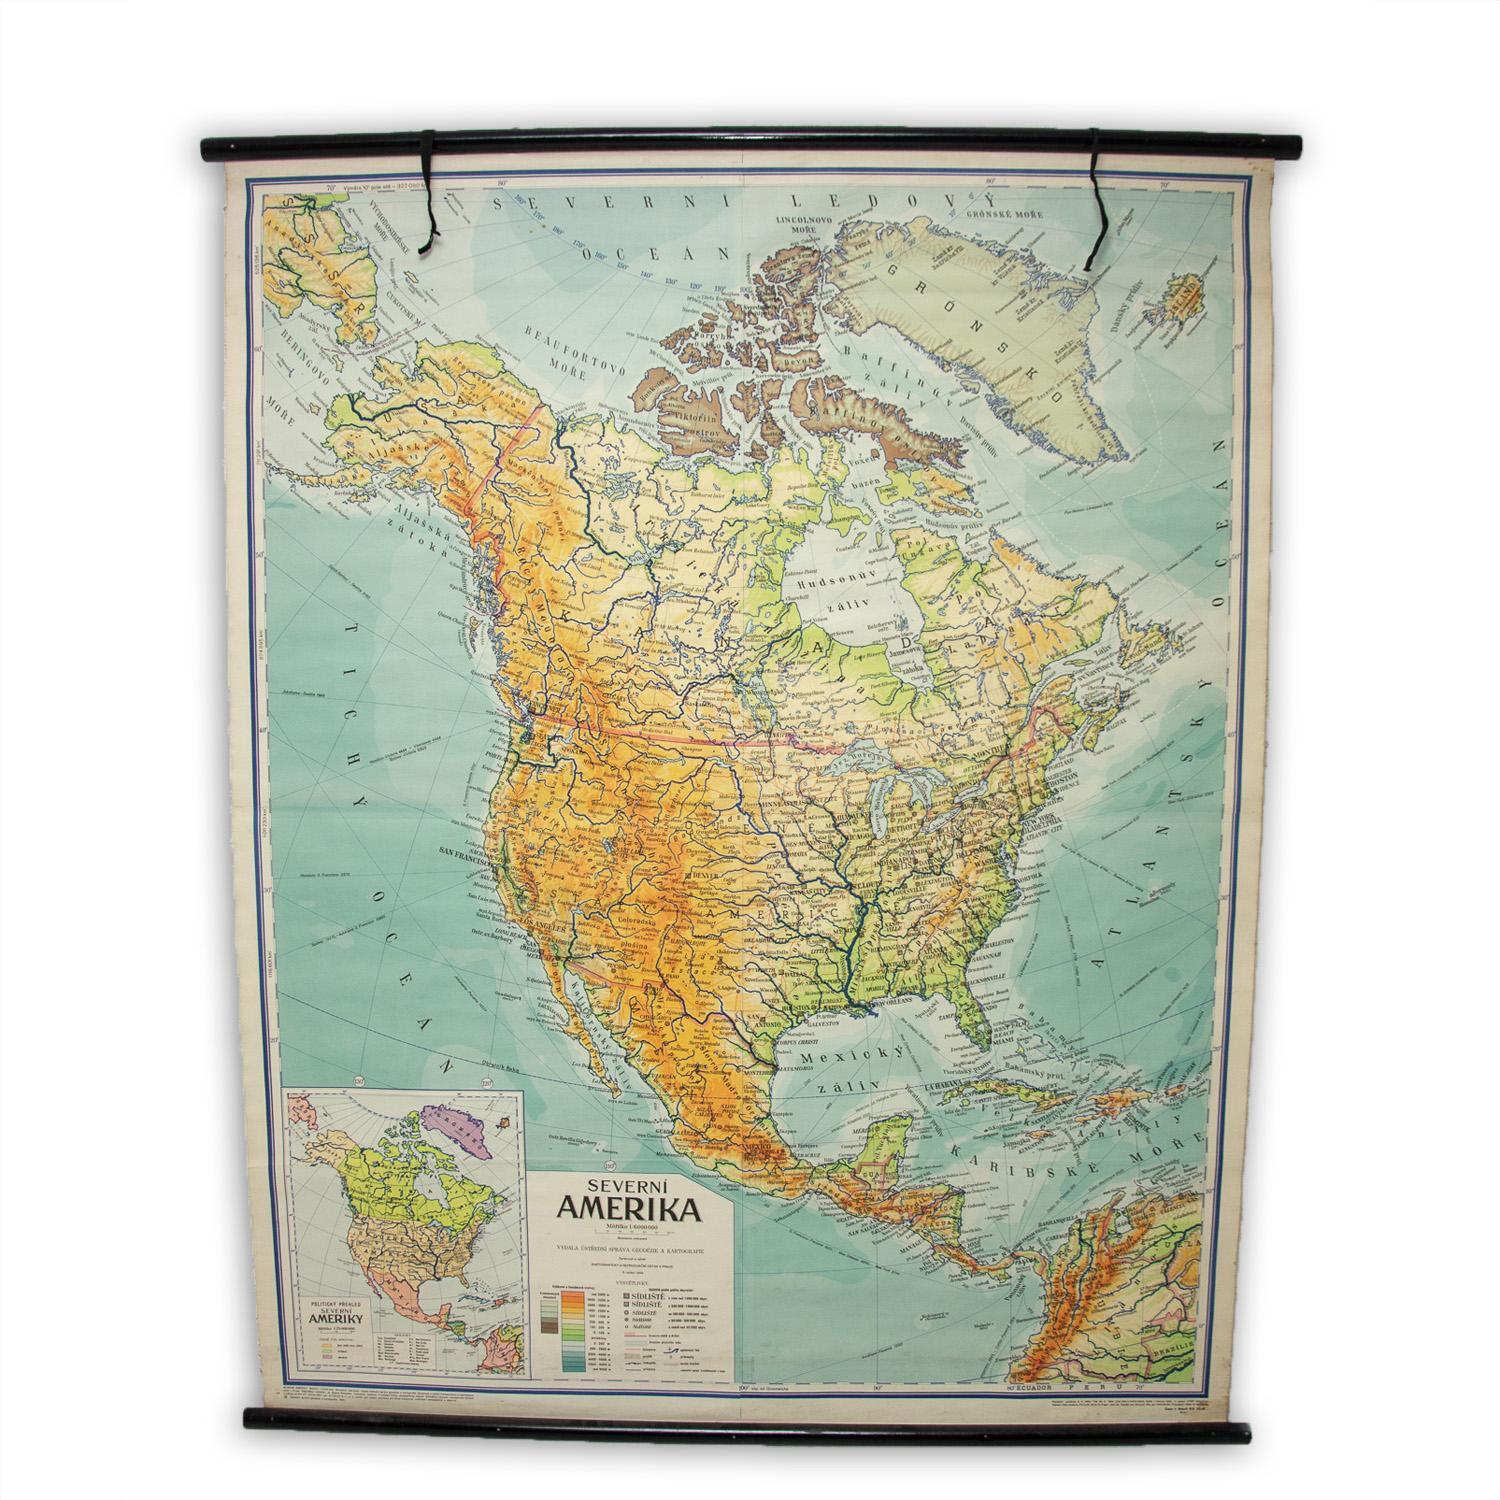 Old vintage school paper economic map of North America. It was produced in 1959 in the former Czechoslovakia. Map has on top and bottom wooden slats. It´s in good Vintage condition, bears signs of age and use.
  
  